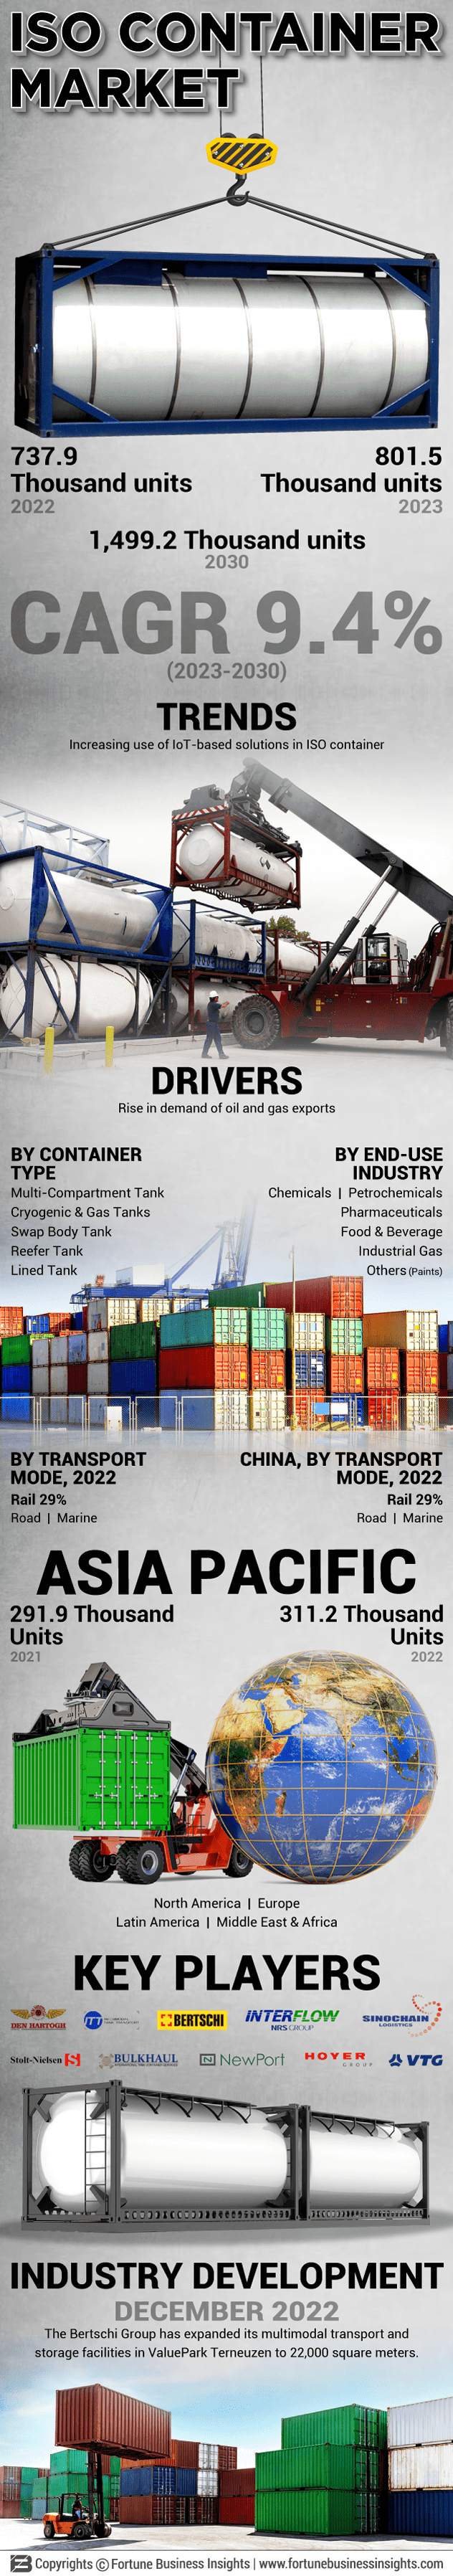 ISO Container Market